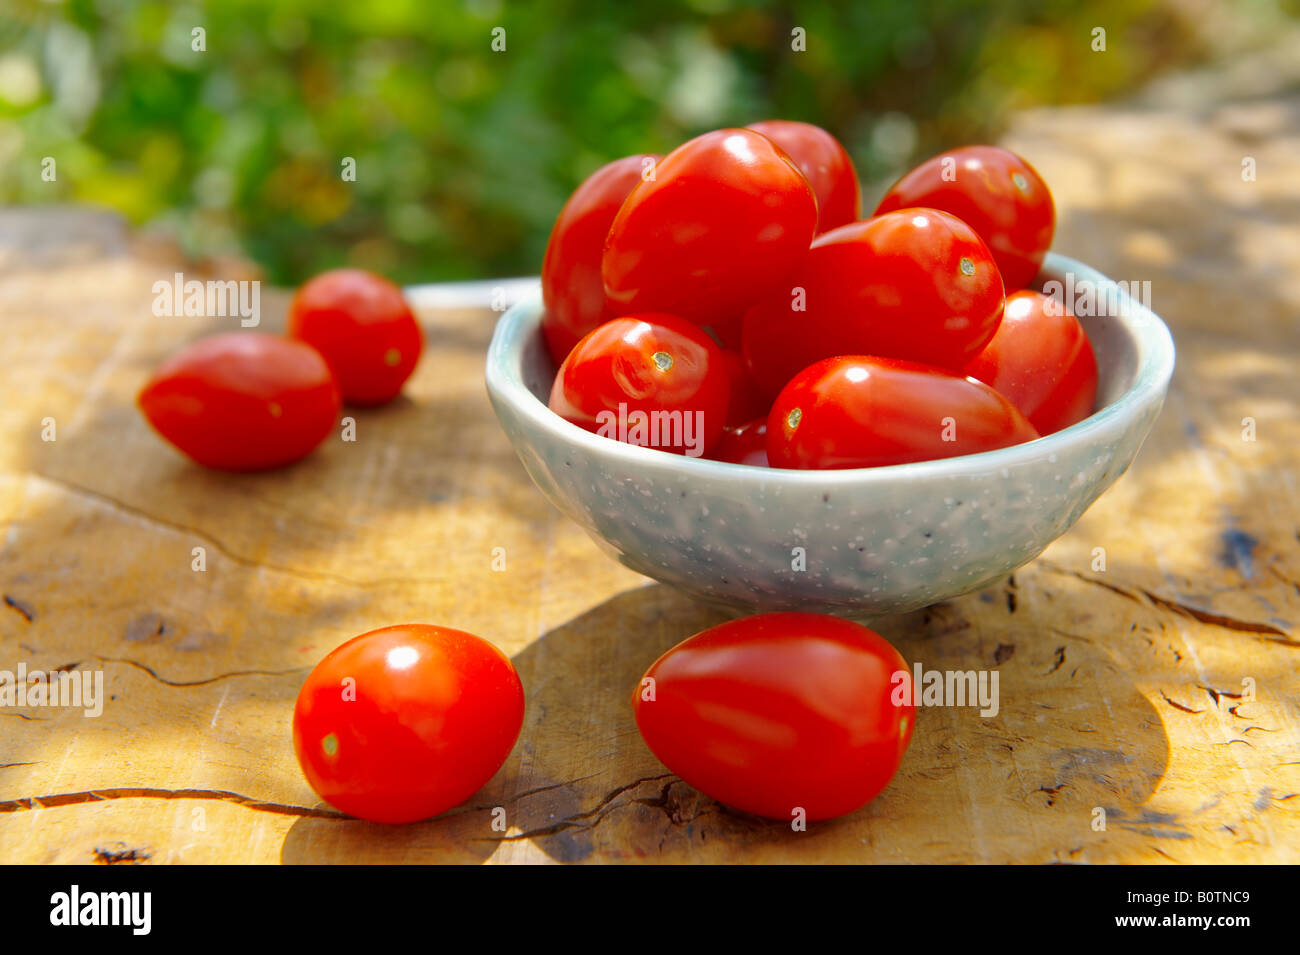 Fresh picked Pomodorino plum tomato in a bowl on a wooden garden table in the sun Stock Photo